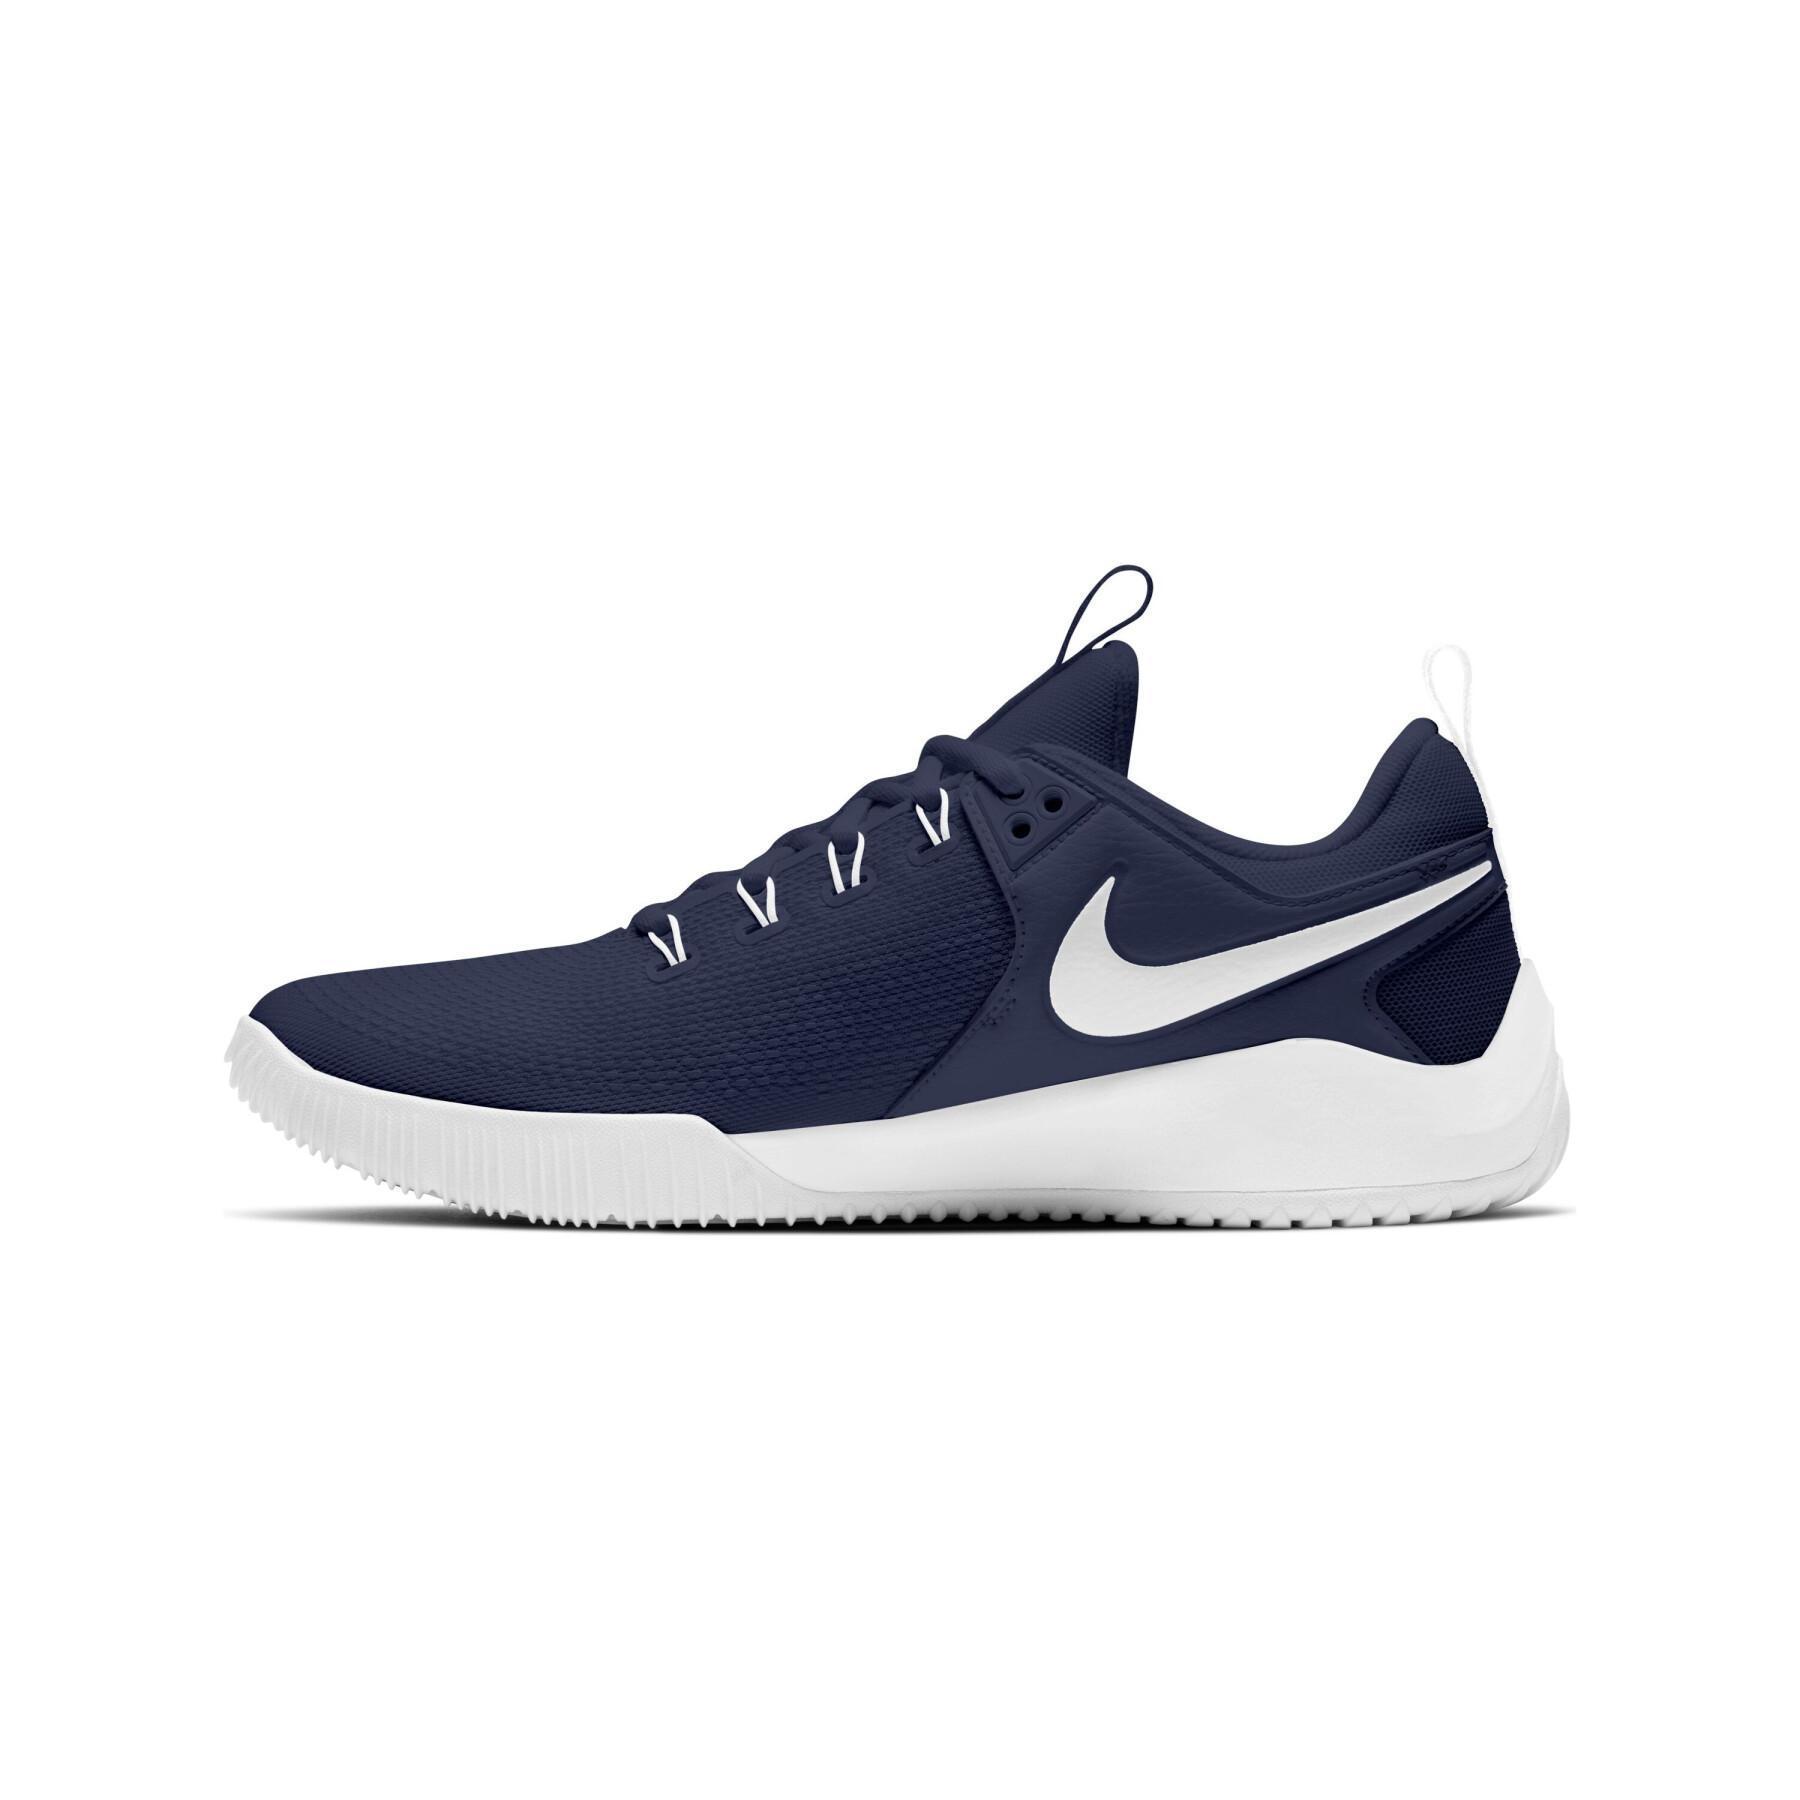 Chaussures Nike Hyperace 2